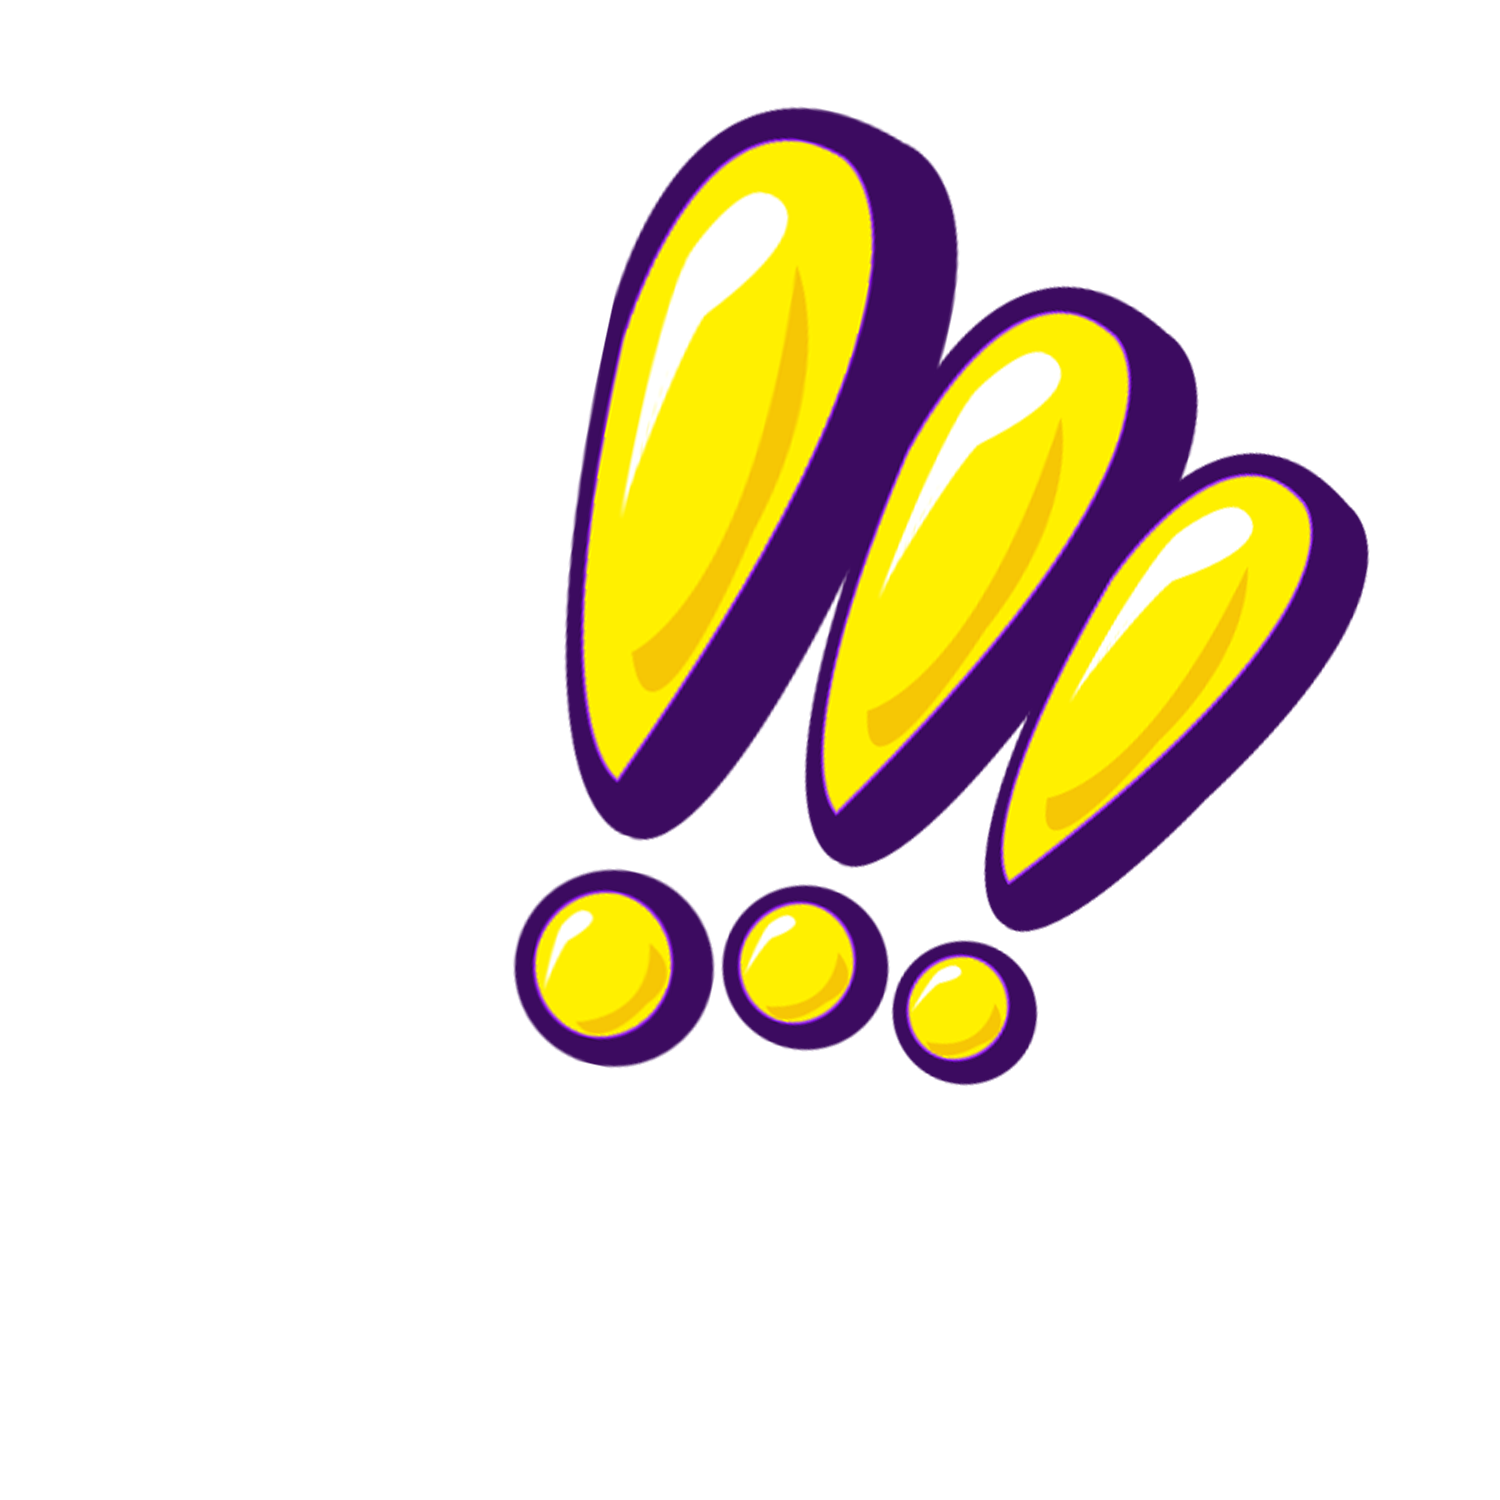 Exclamation Mark PNG Free Download